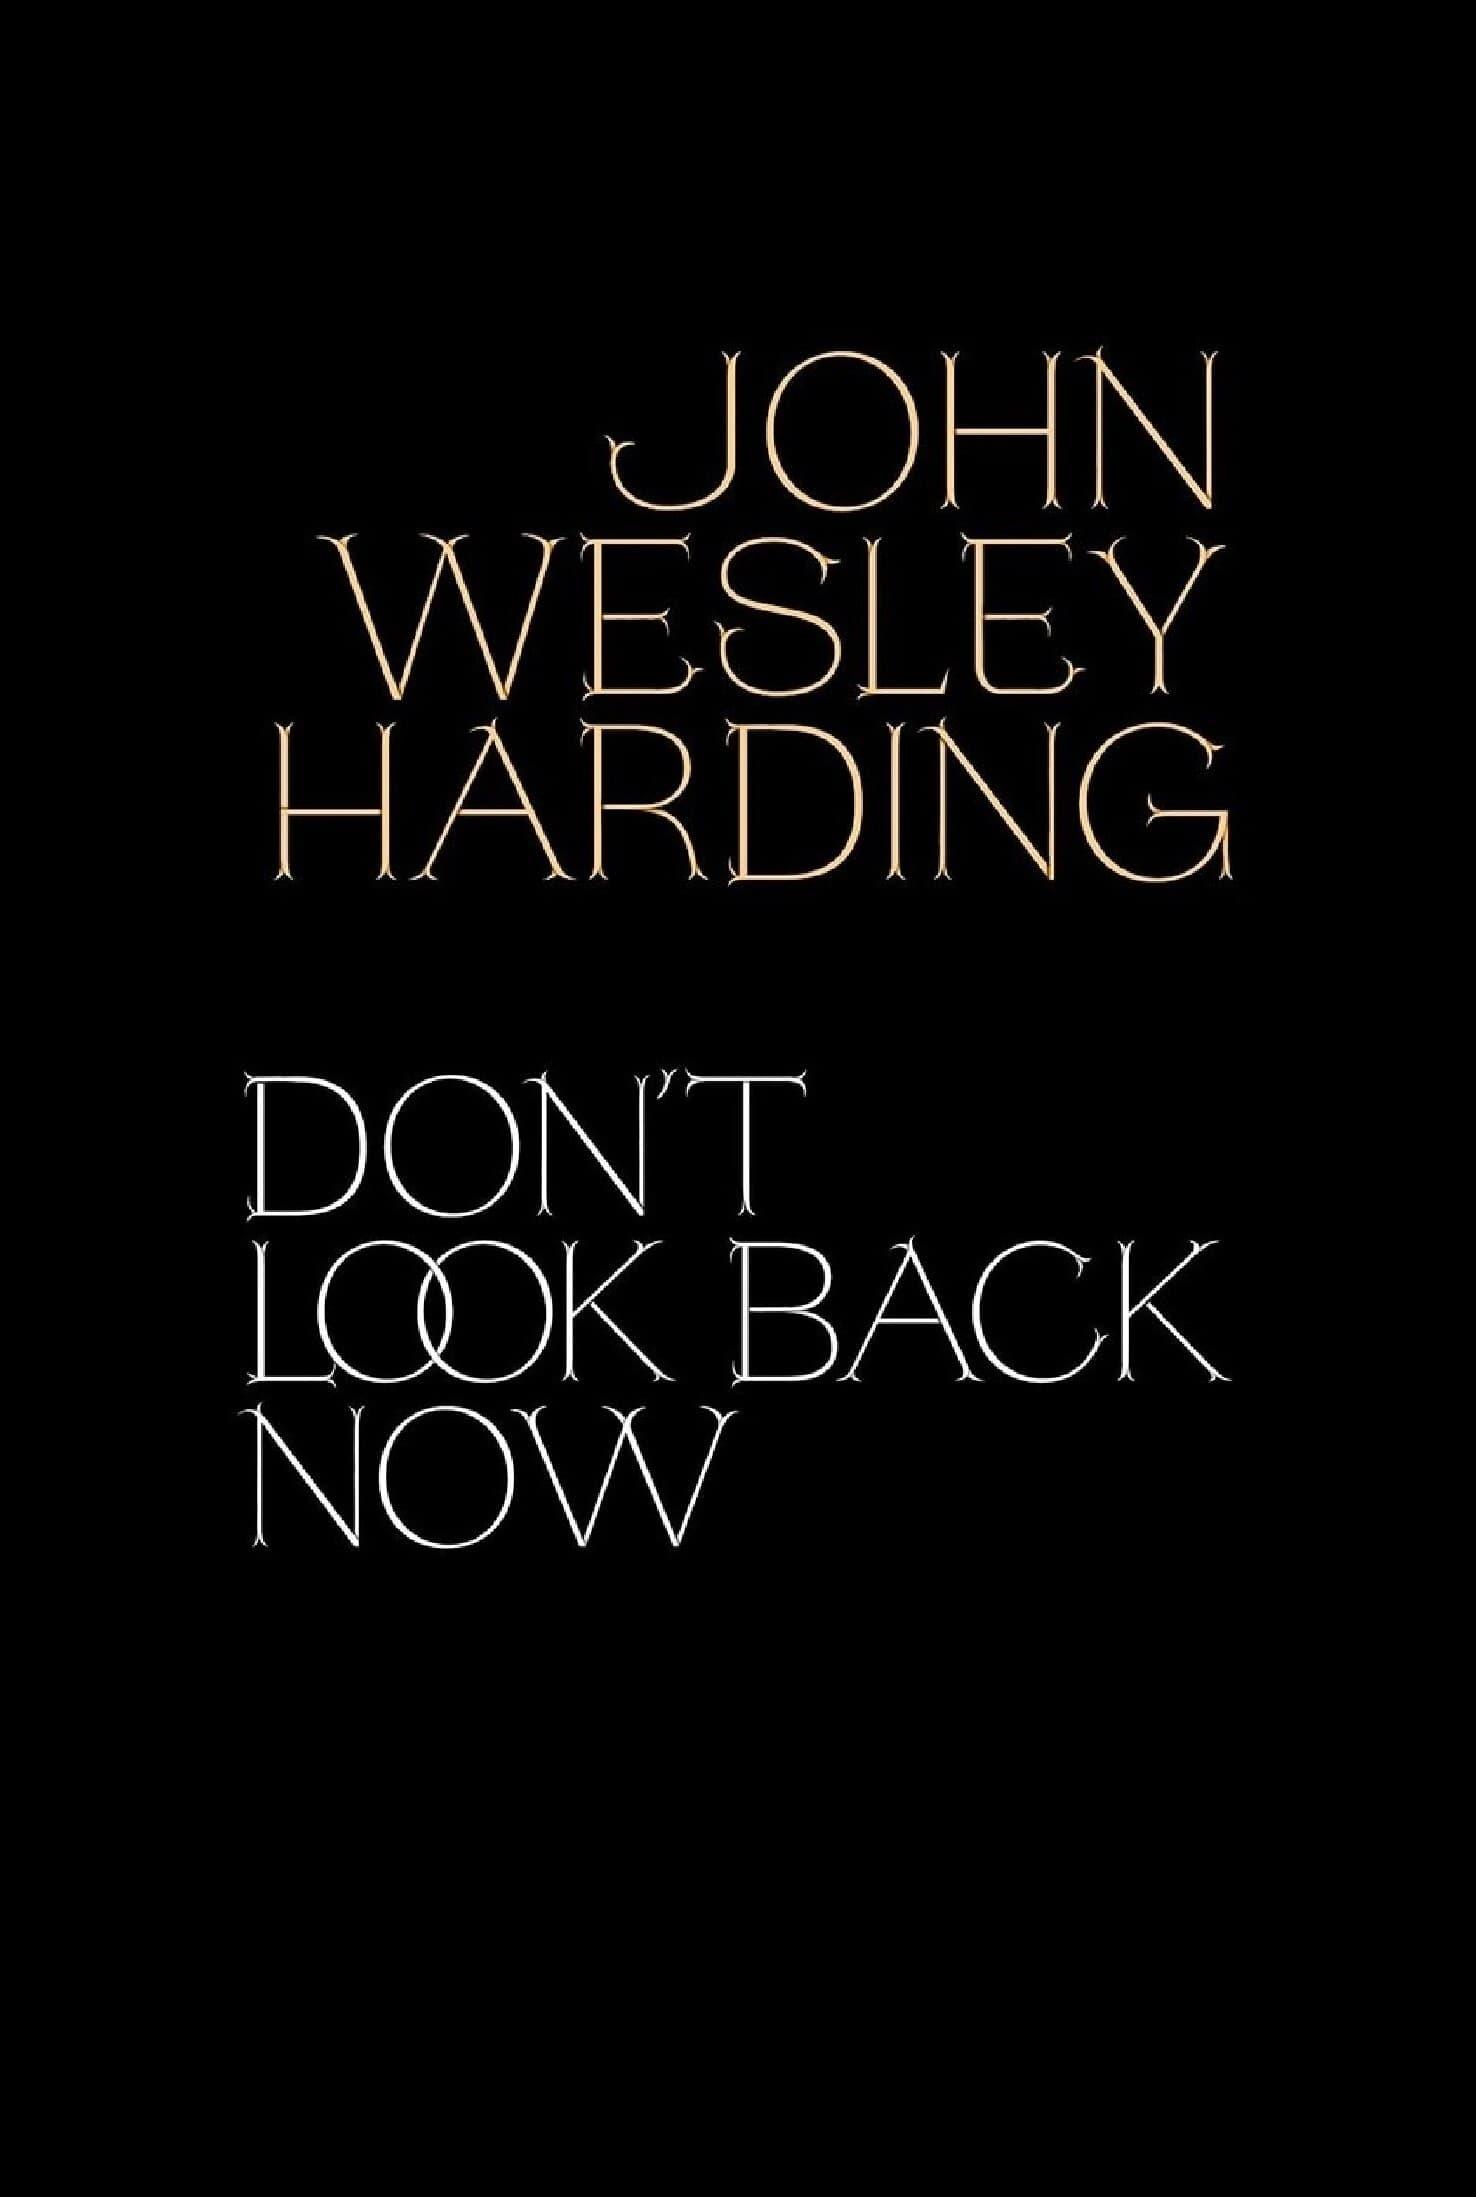 John Wesley Harding: Don't Look Back Now - The Film poster